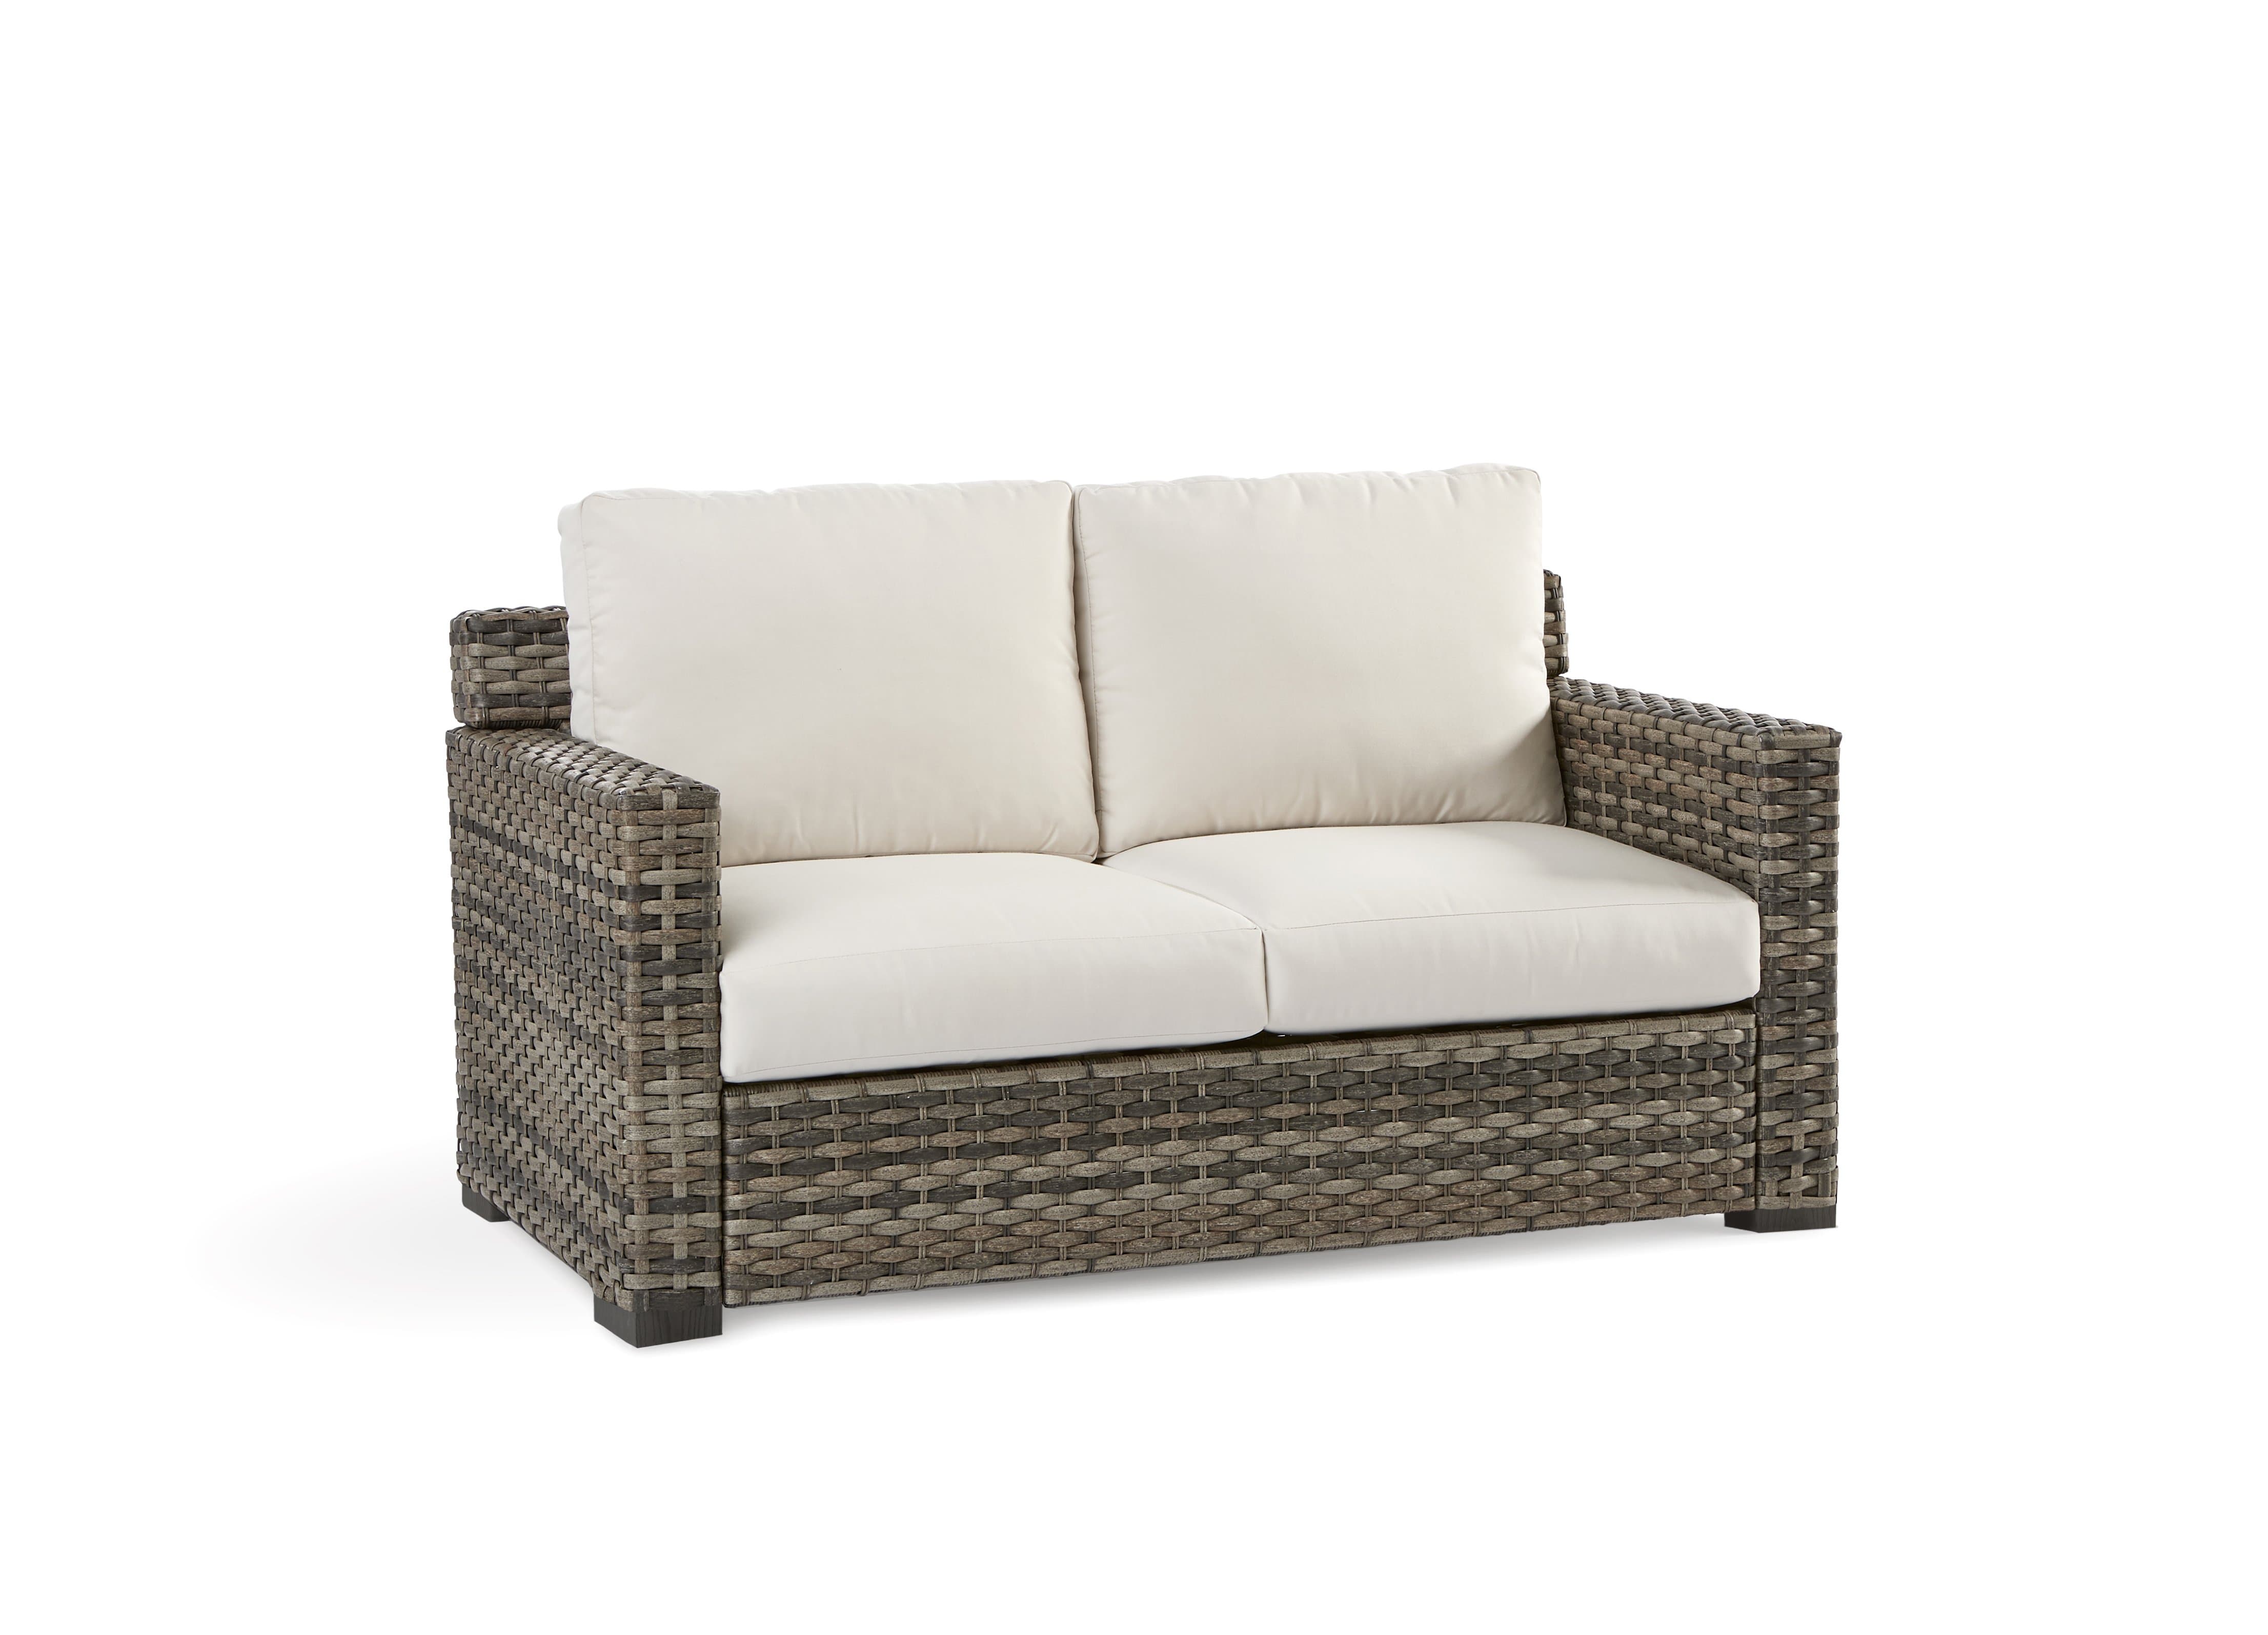 South Sea Outdoor Living Outdoor Furniture New Java Patio Loveseat With Cushion